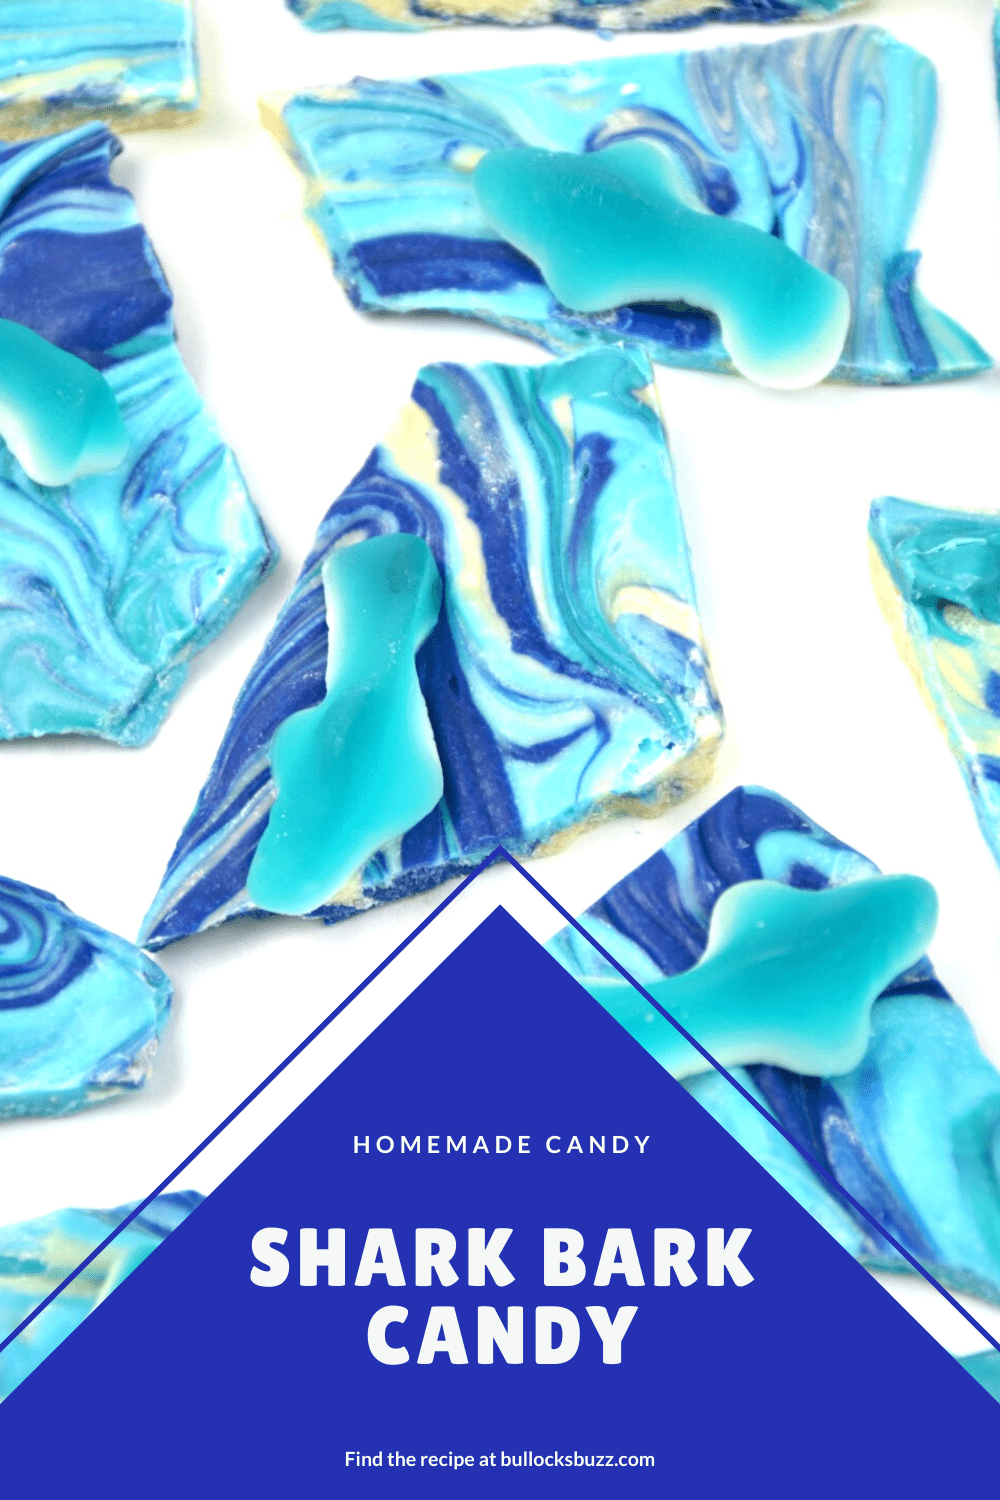 Fruit flavored gummy sharks swim in a colorful swirl of chocolate candy bark in this Shark Bark recipe. It's perfect for a beach-themed party or shark week treat! 